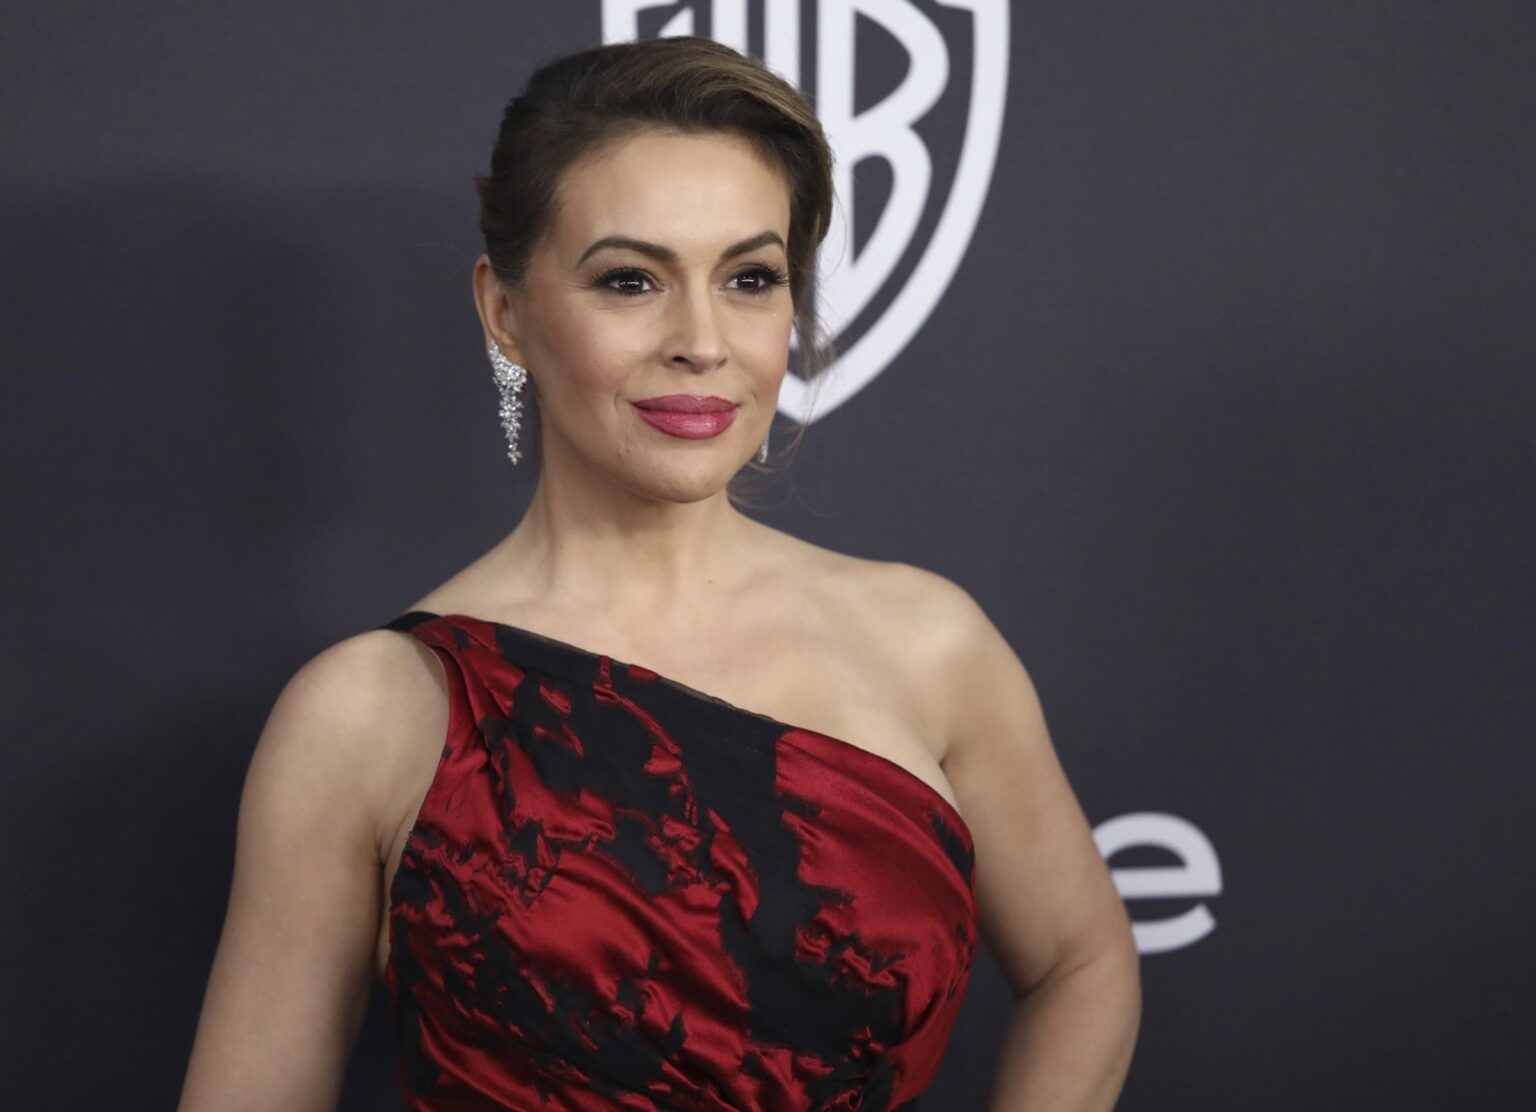 Alyssa Milano has recently been arrested while protesting for voting rights. See how she's one of many demanding Joe Biden to protect the right to vote.